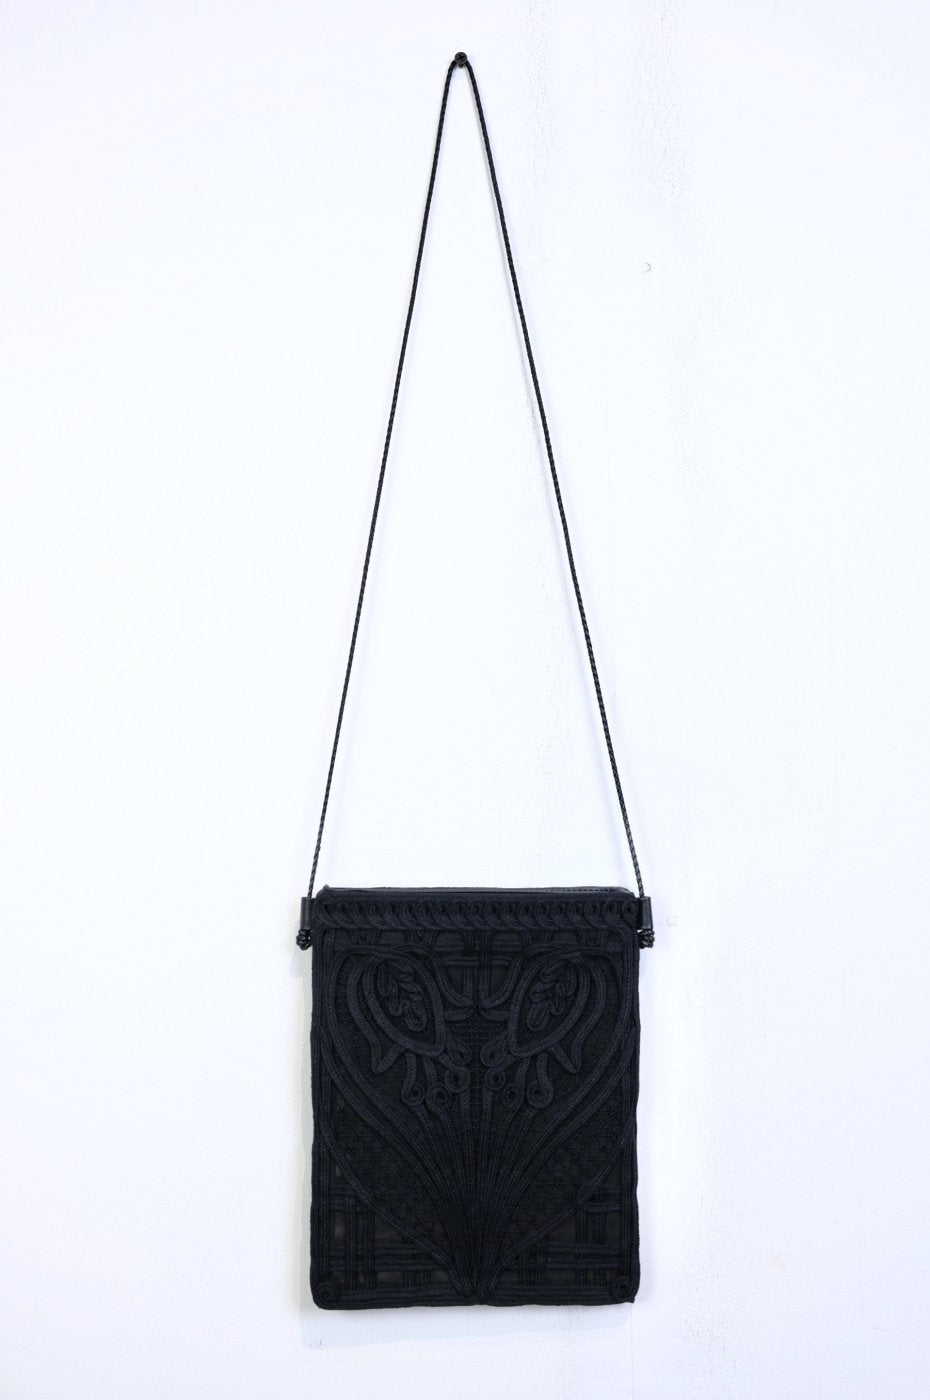 Mame Kurogouchi "CORDING EMBROIDERY POUCH WITH LEATHER STRAP"